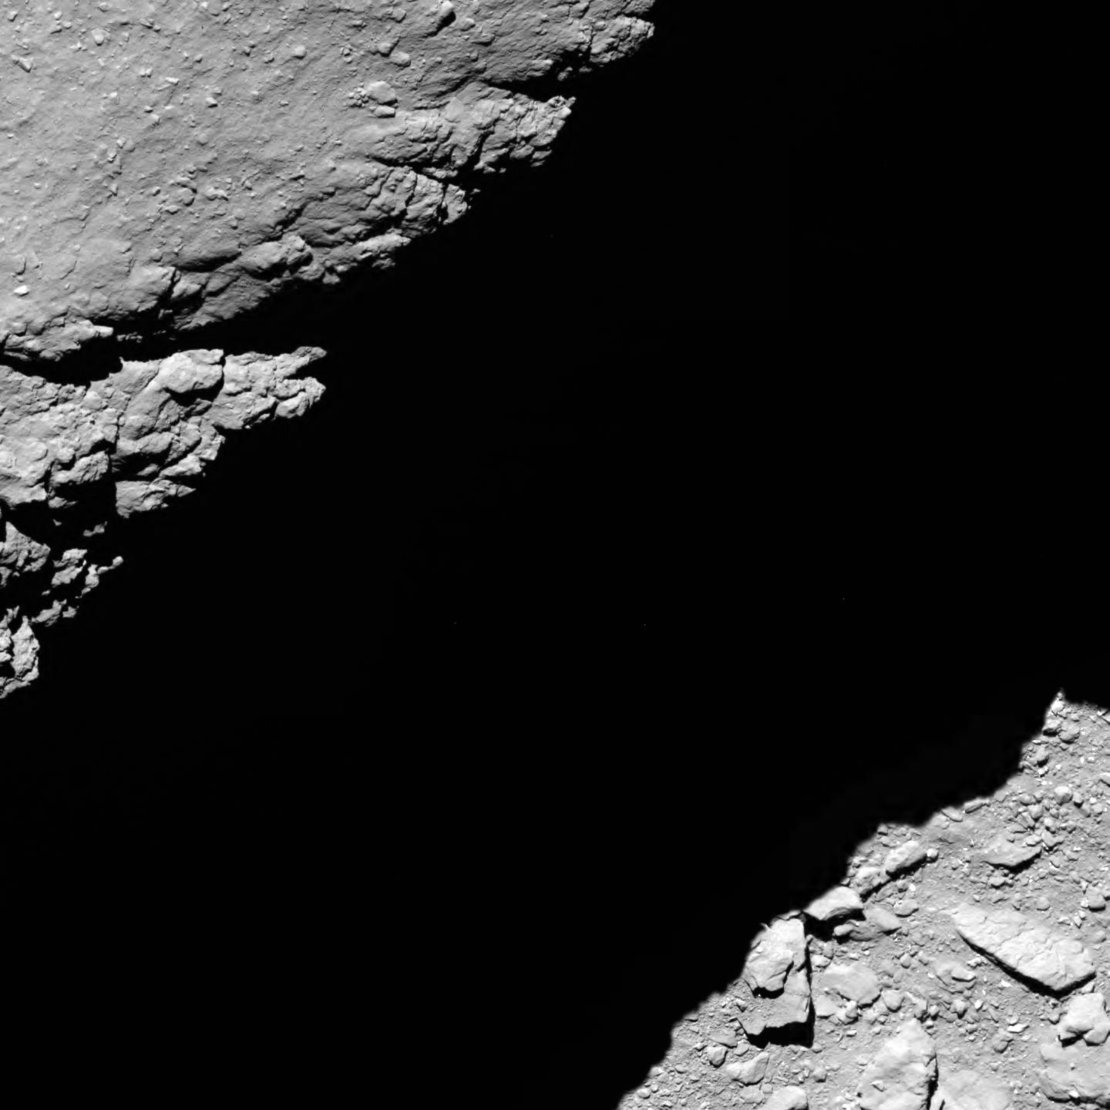 Comet 67P from 0.75 miles (1.2 km)